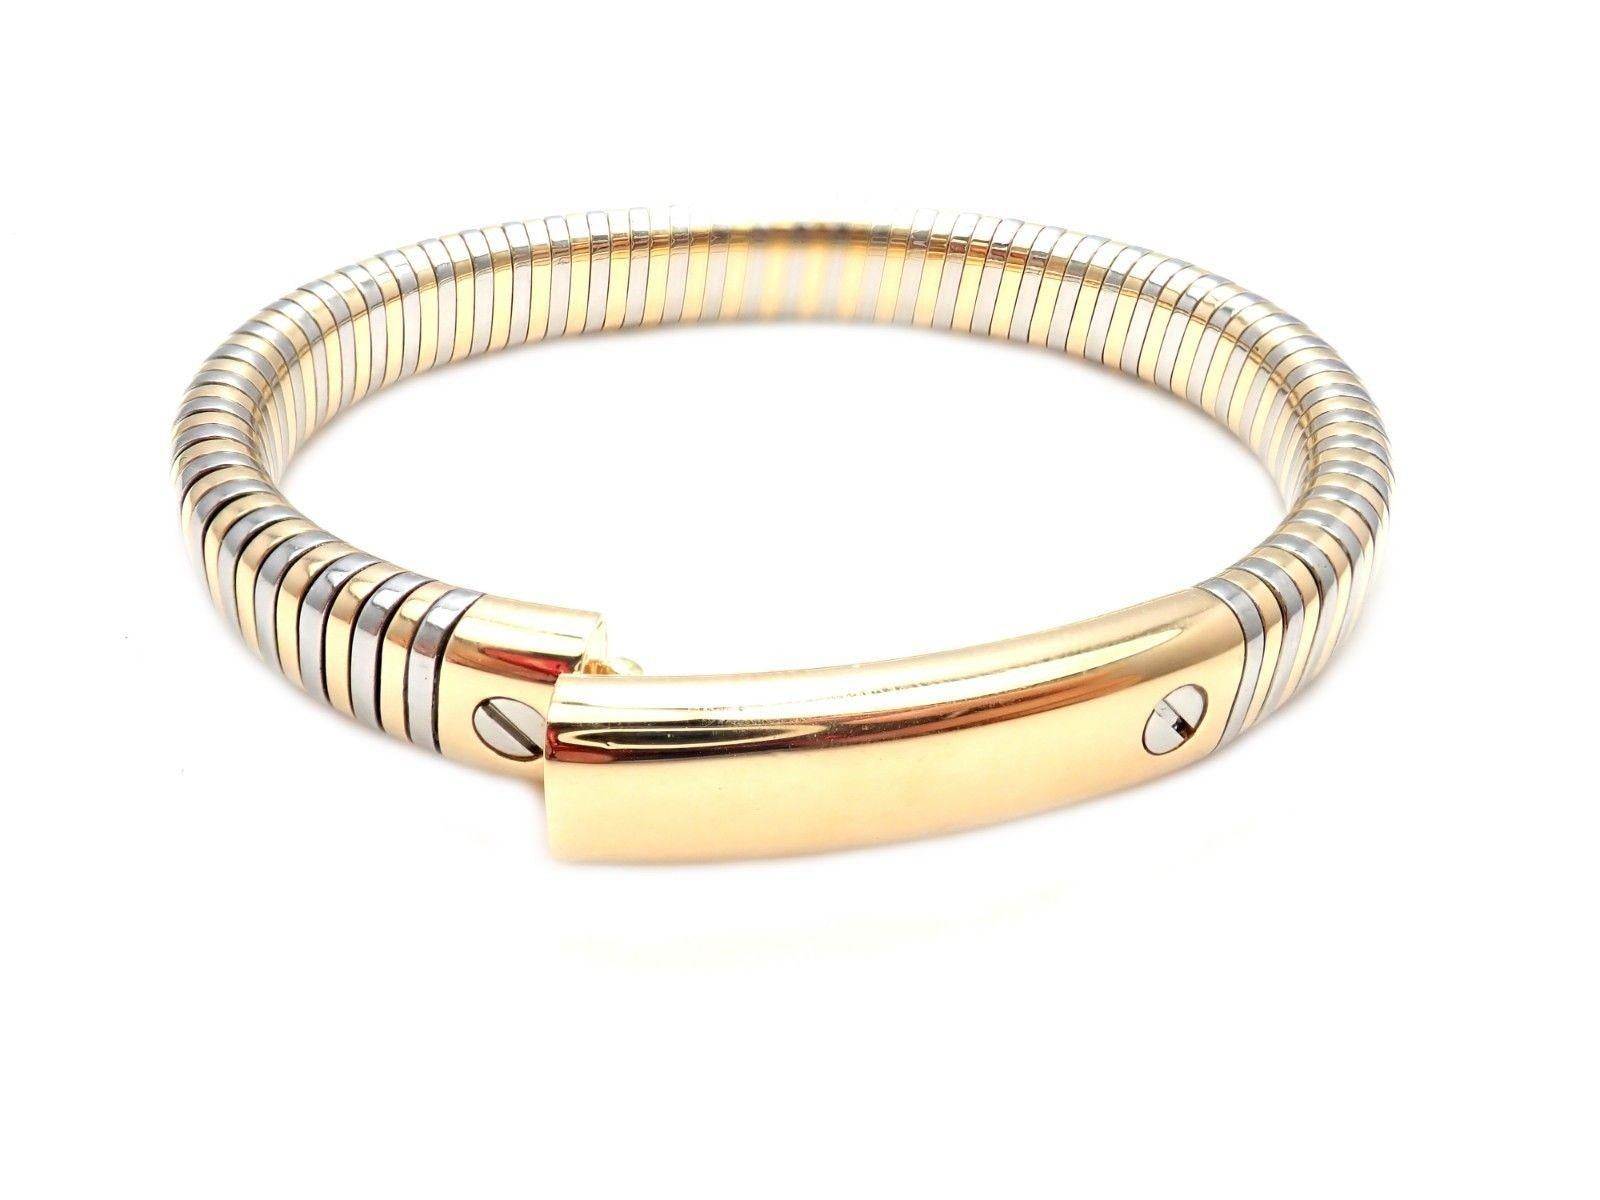 18k Yellow Gold And Stainless Steel Bangle Bracelet by Van Cleef & Arpels. 
Details:
Length: 7.5